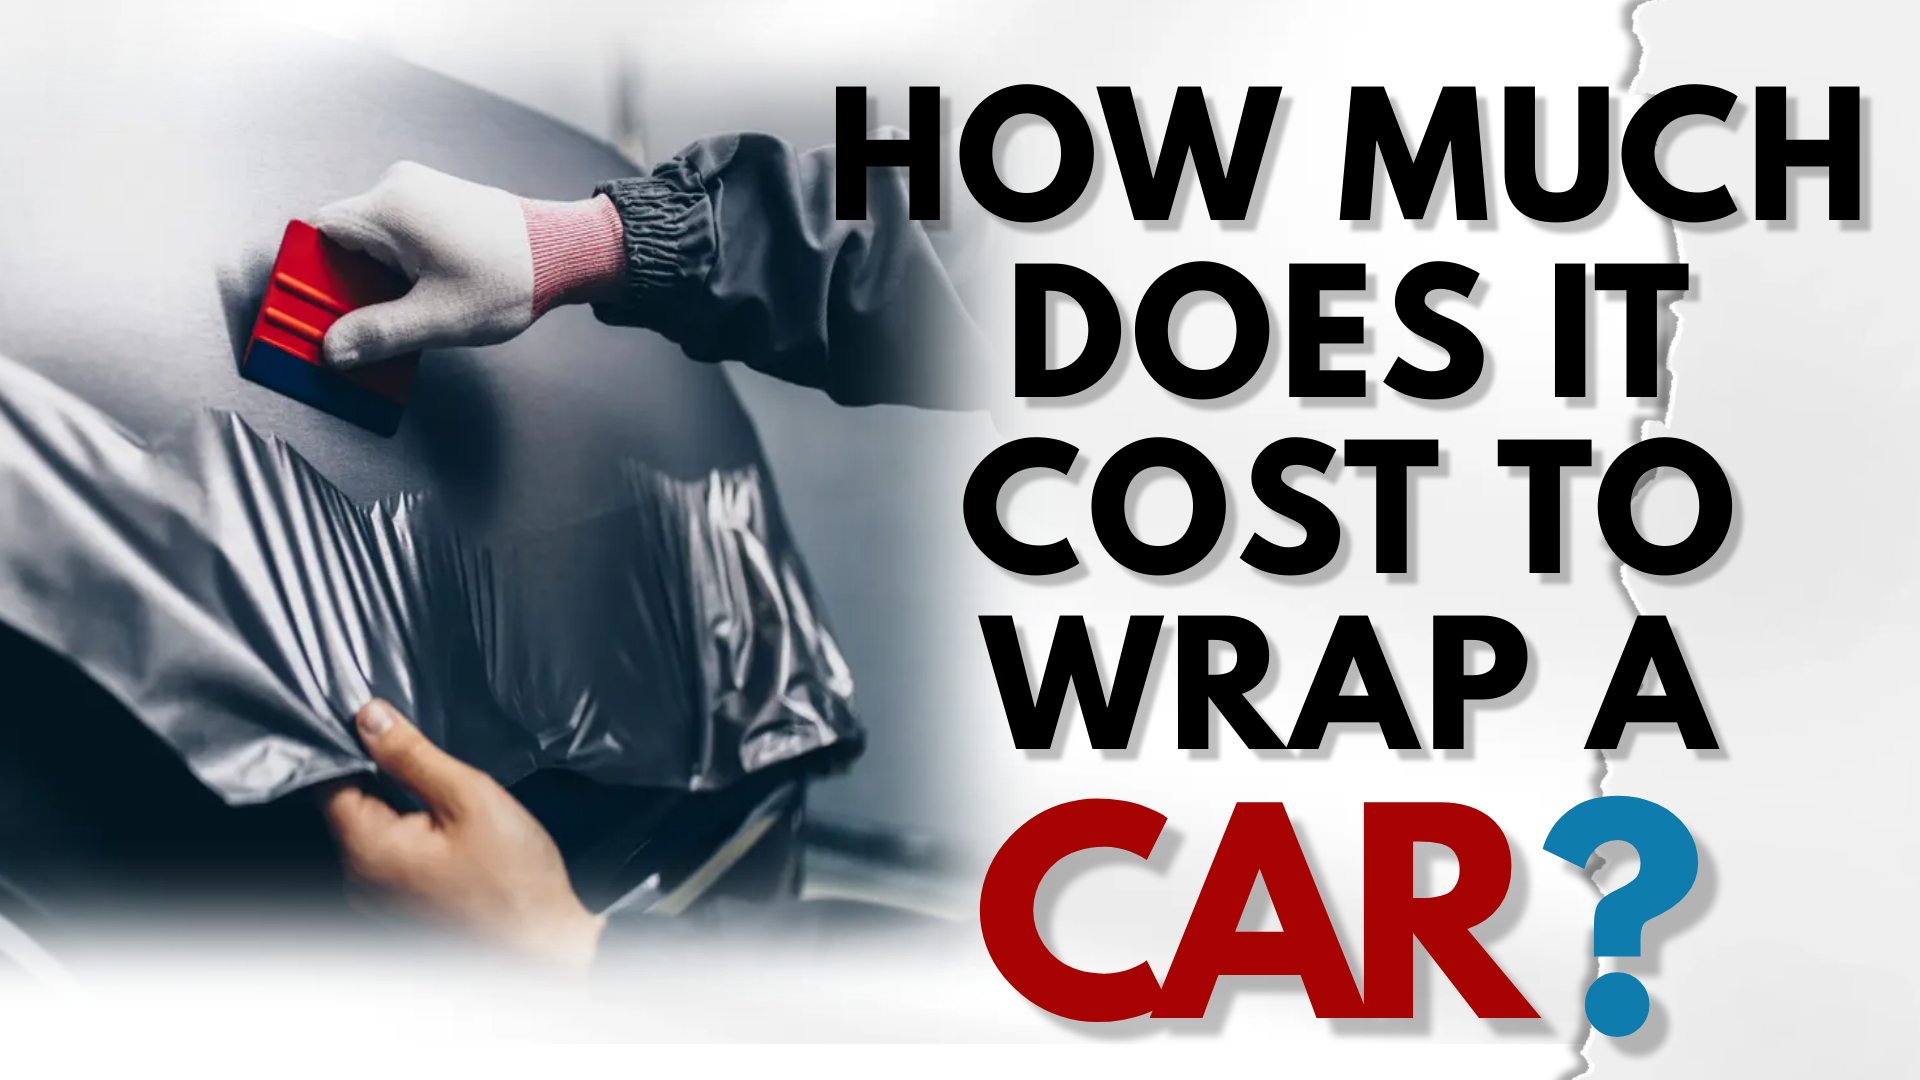 How much does it cost to wrap a car